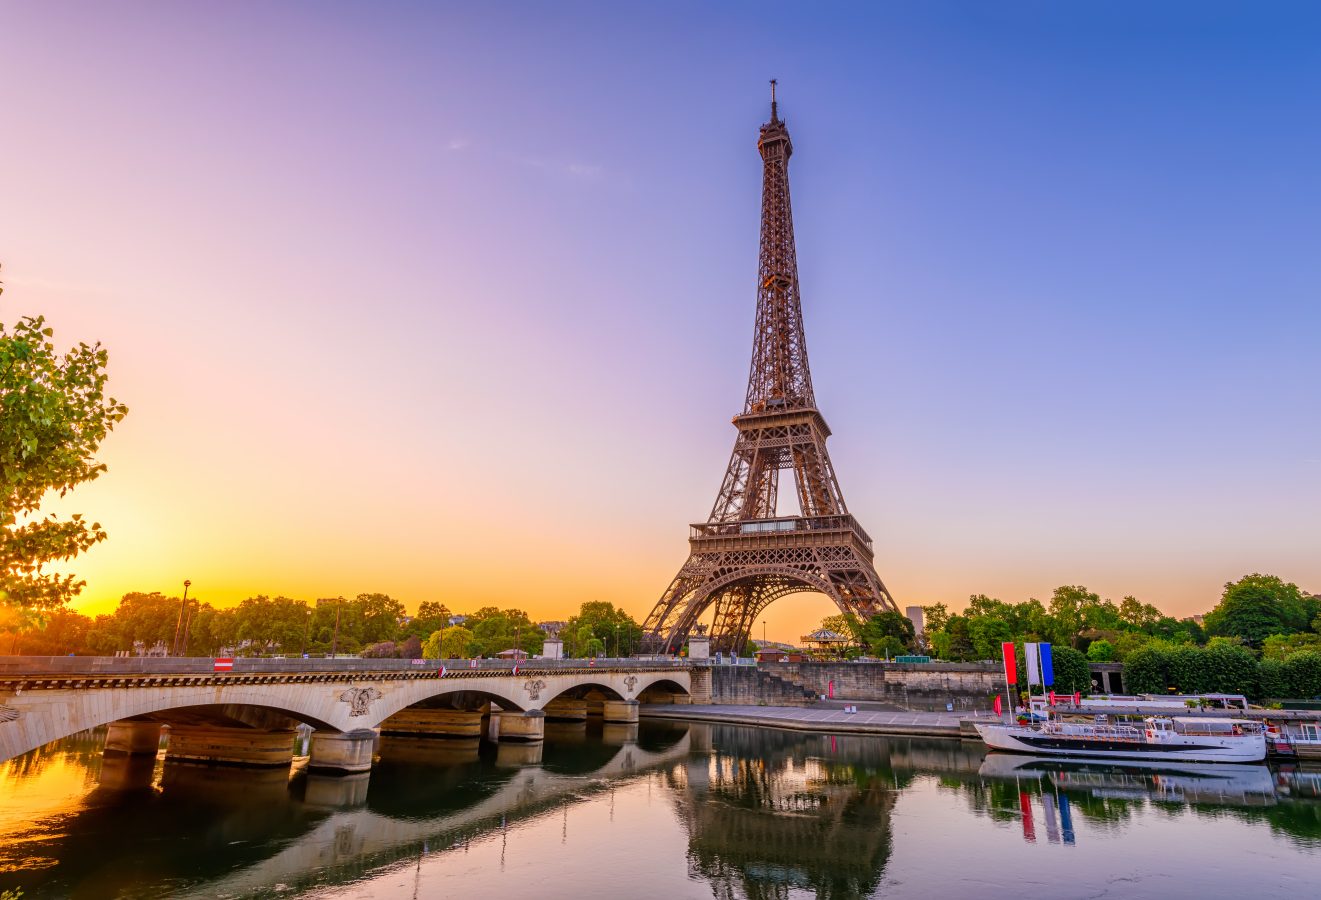 View of Eiffel Tower and river Seine at sunrise in Paris, France